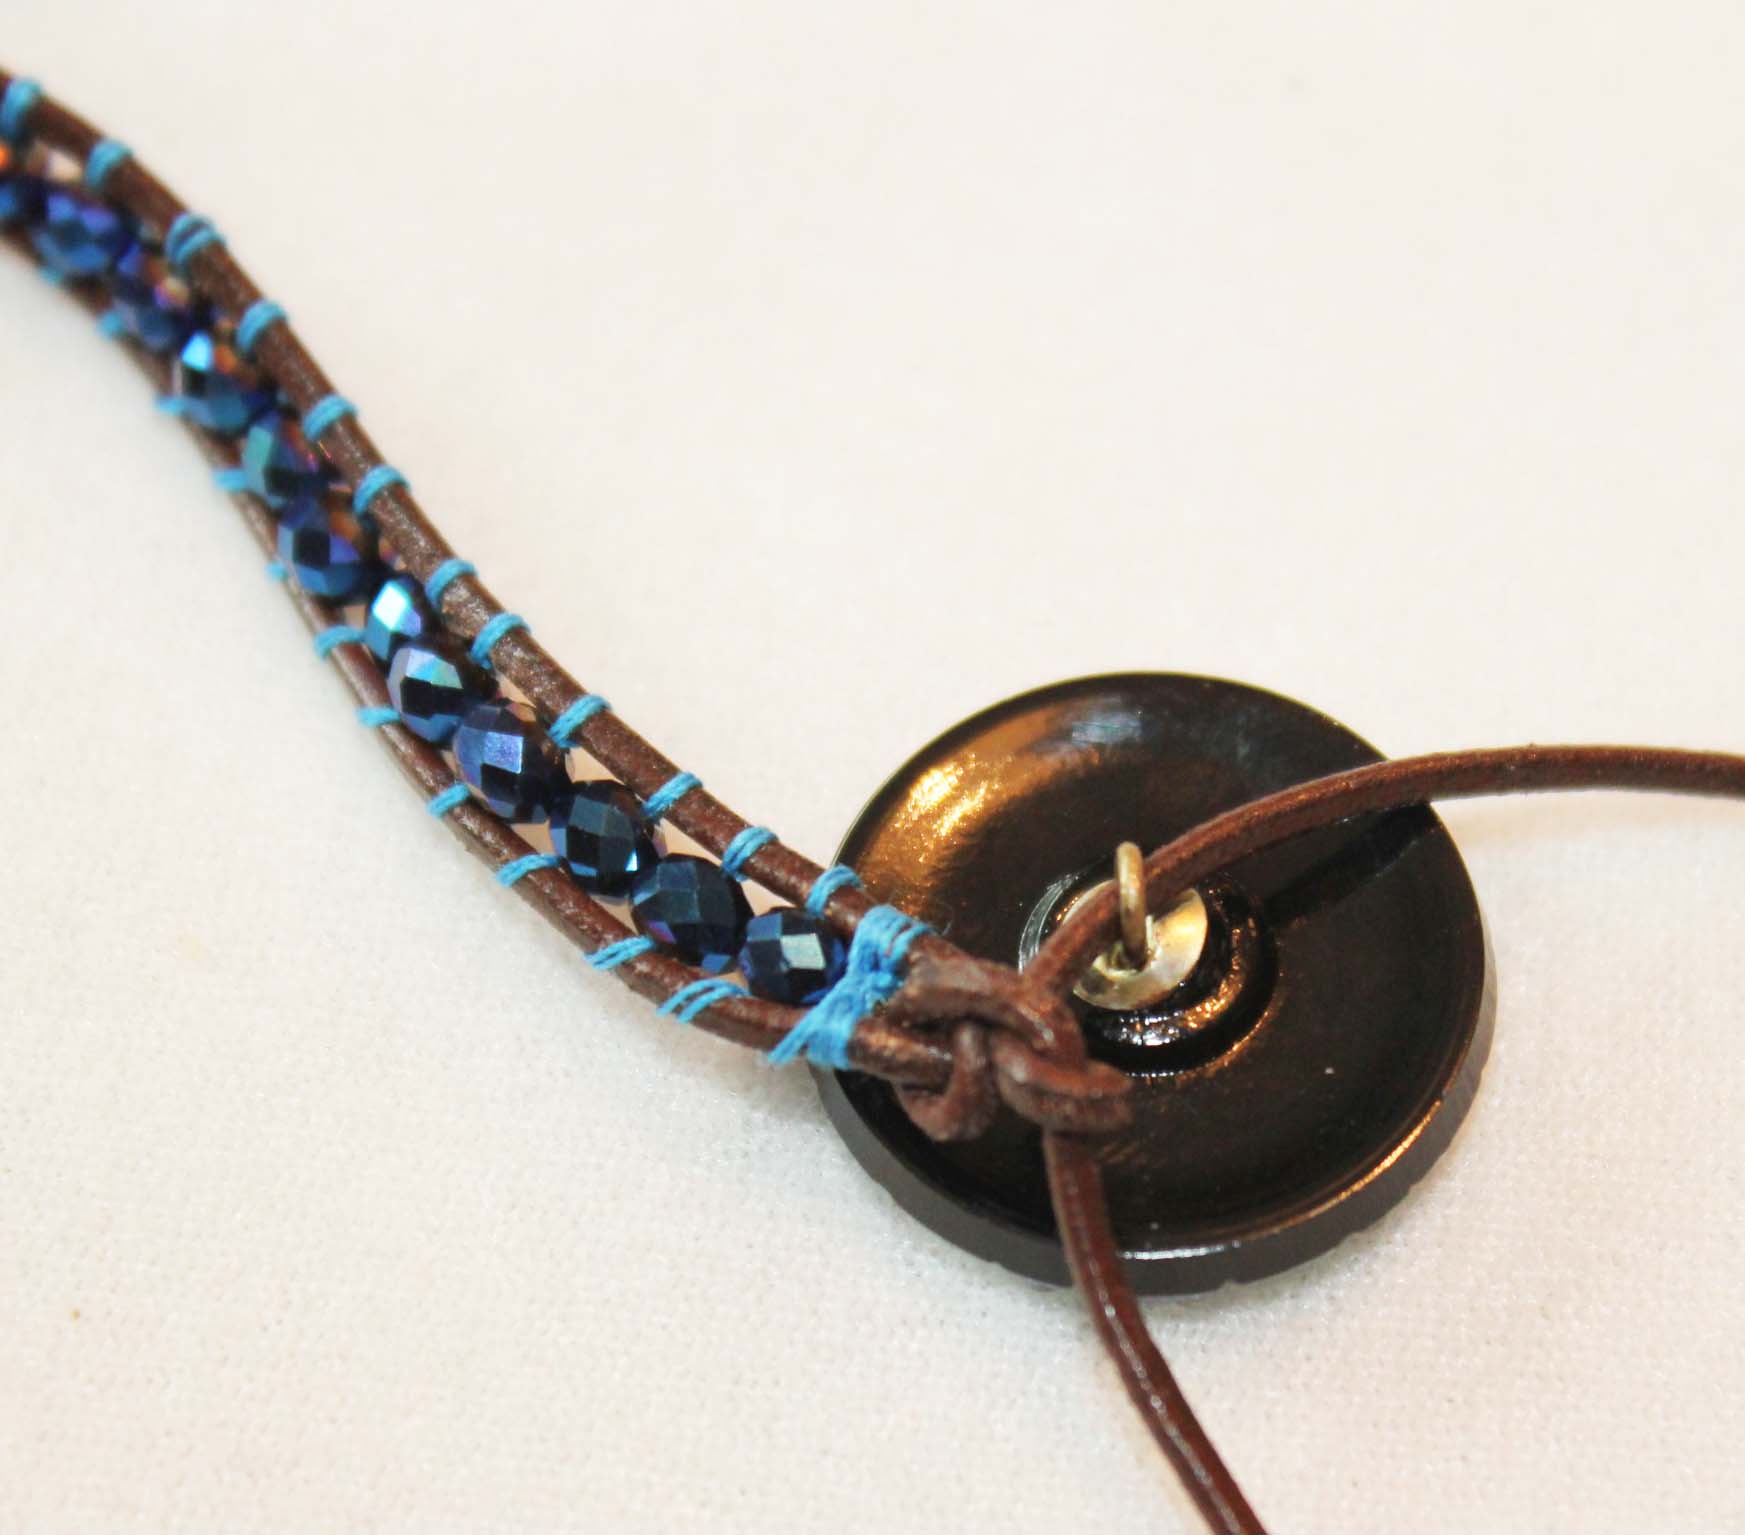 Tie leather into a knot and add the button to one leather cord